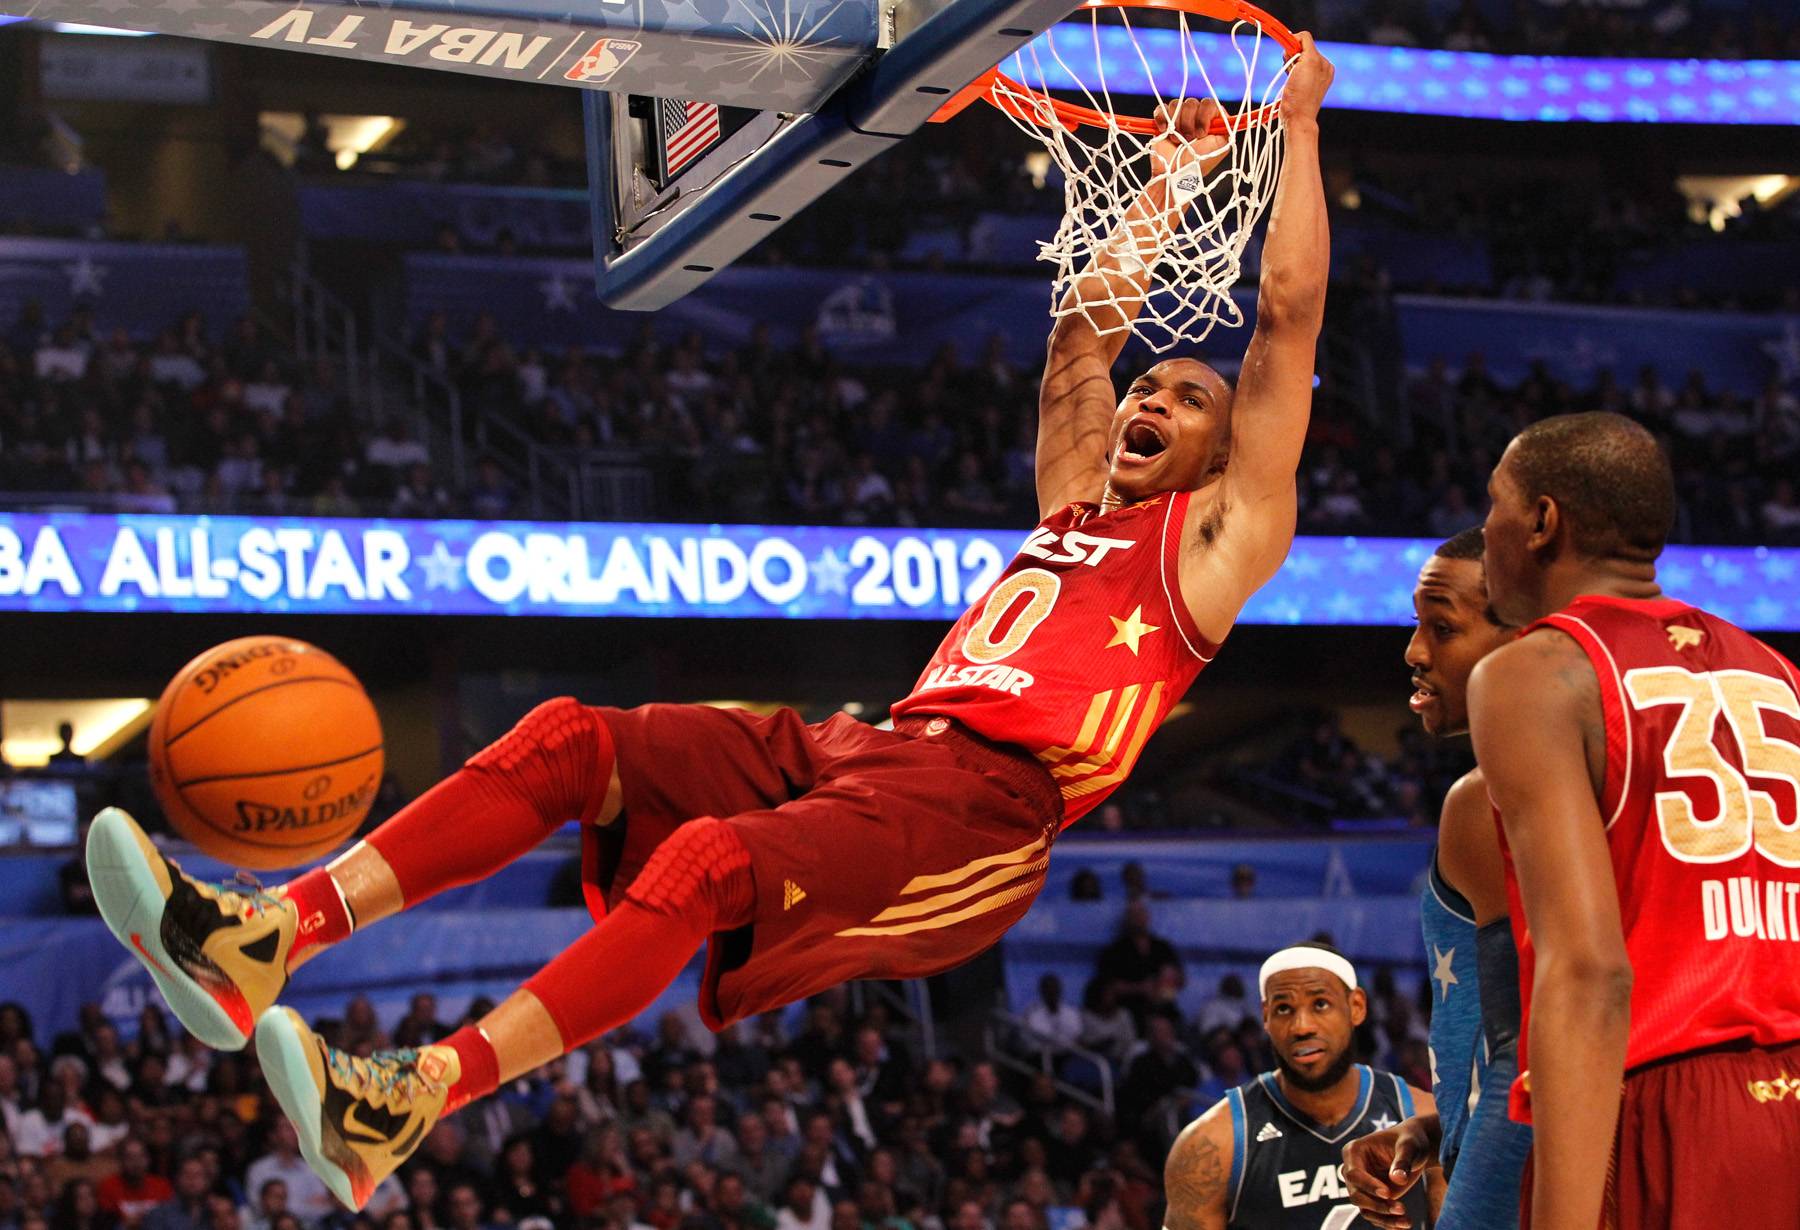 They Got Game - - Image 1 from Photos: 2012 NBA All-Star Game